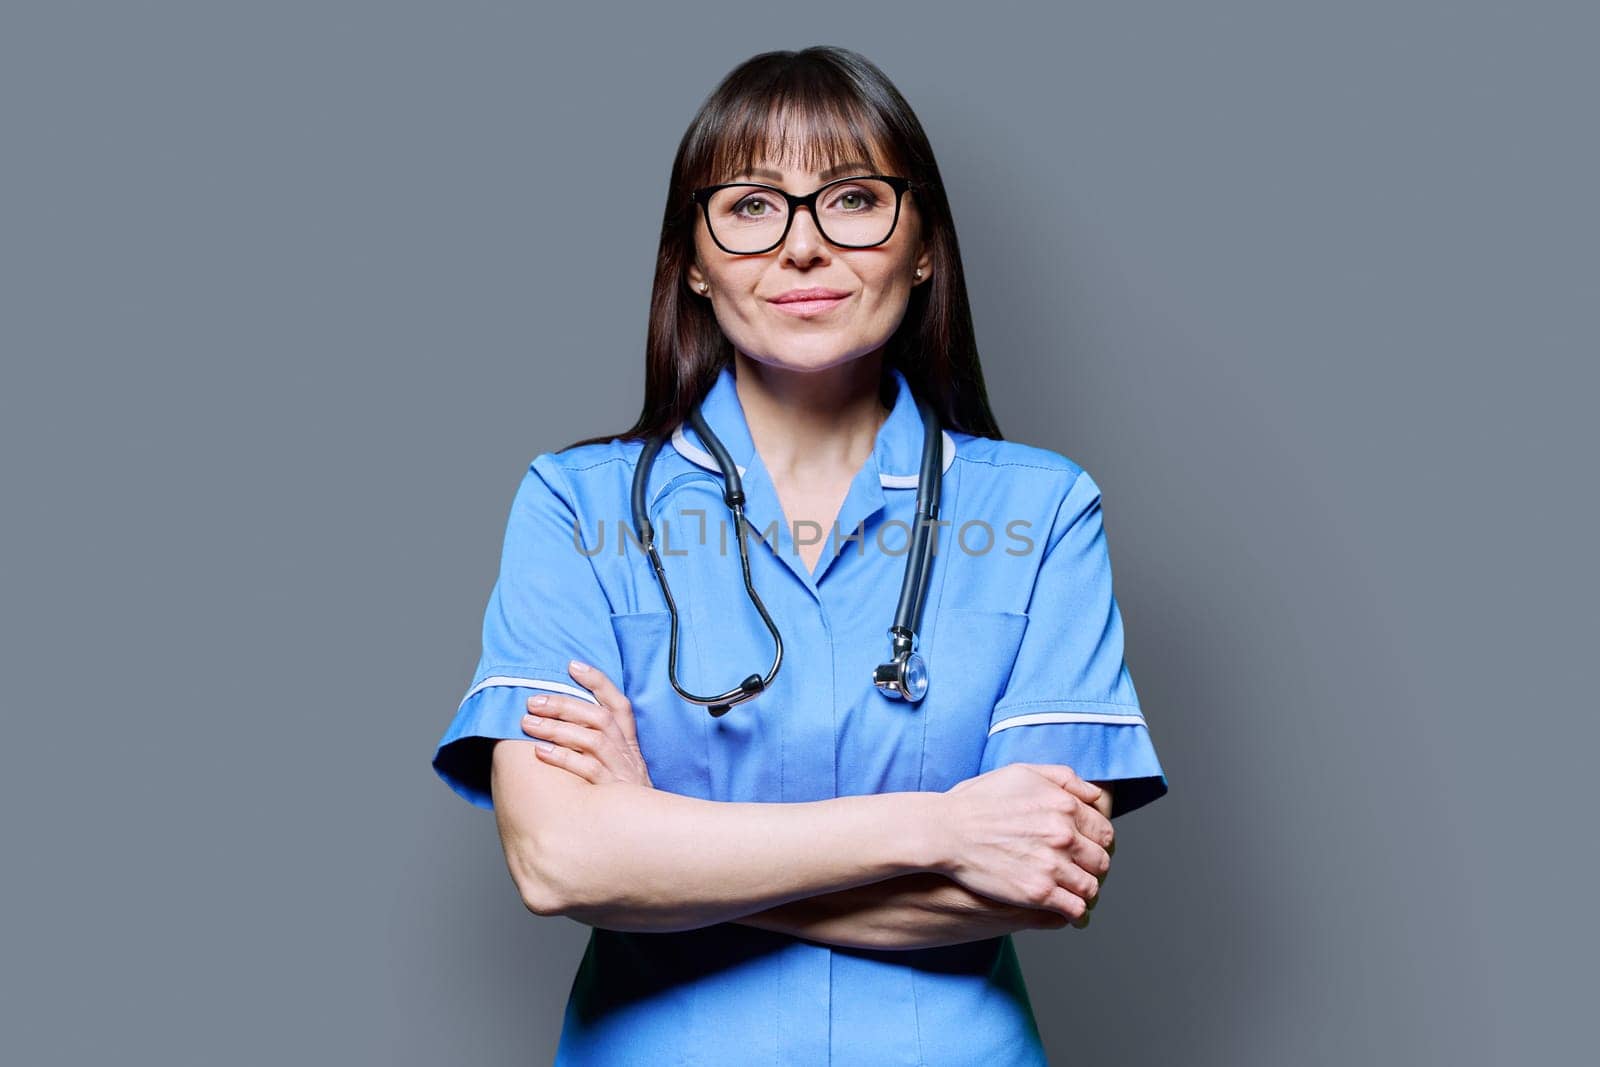 Portrait of smiling middle-aged woman nurse in blue with crossed arms with stethoscope on grey studio background. Medical services, nhs, health, professional assistance, medical care concept